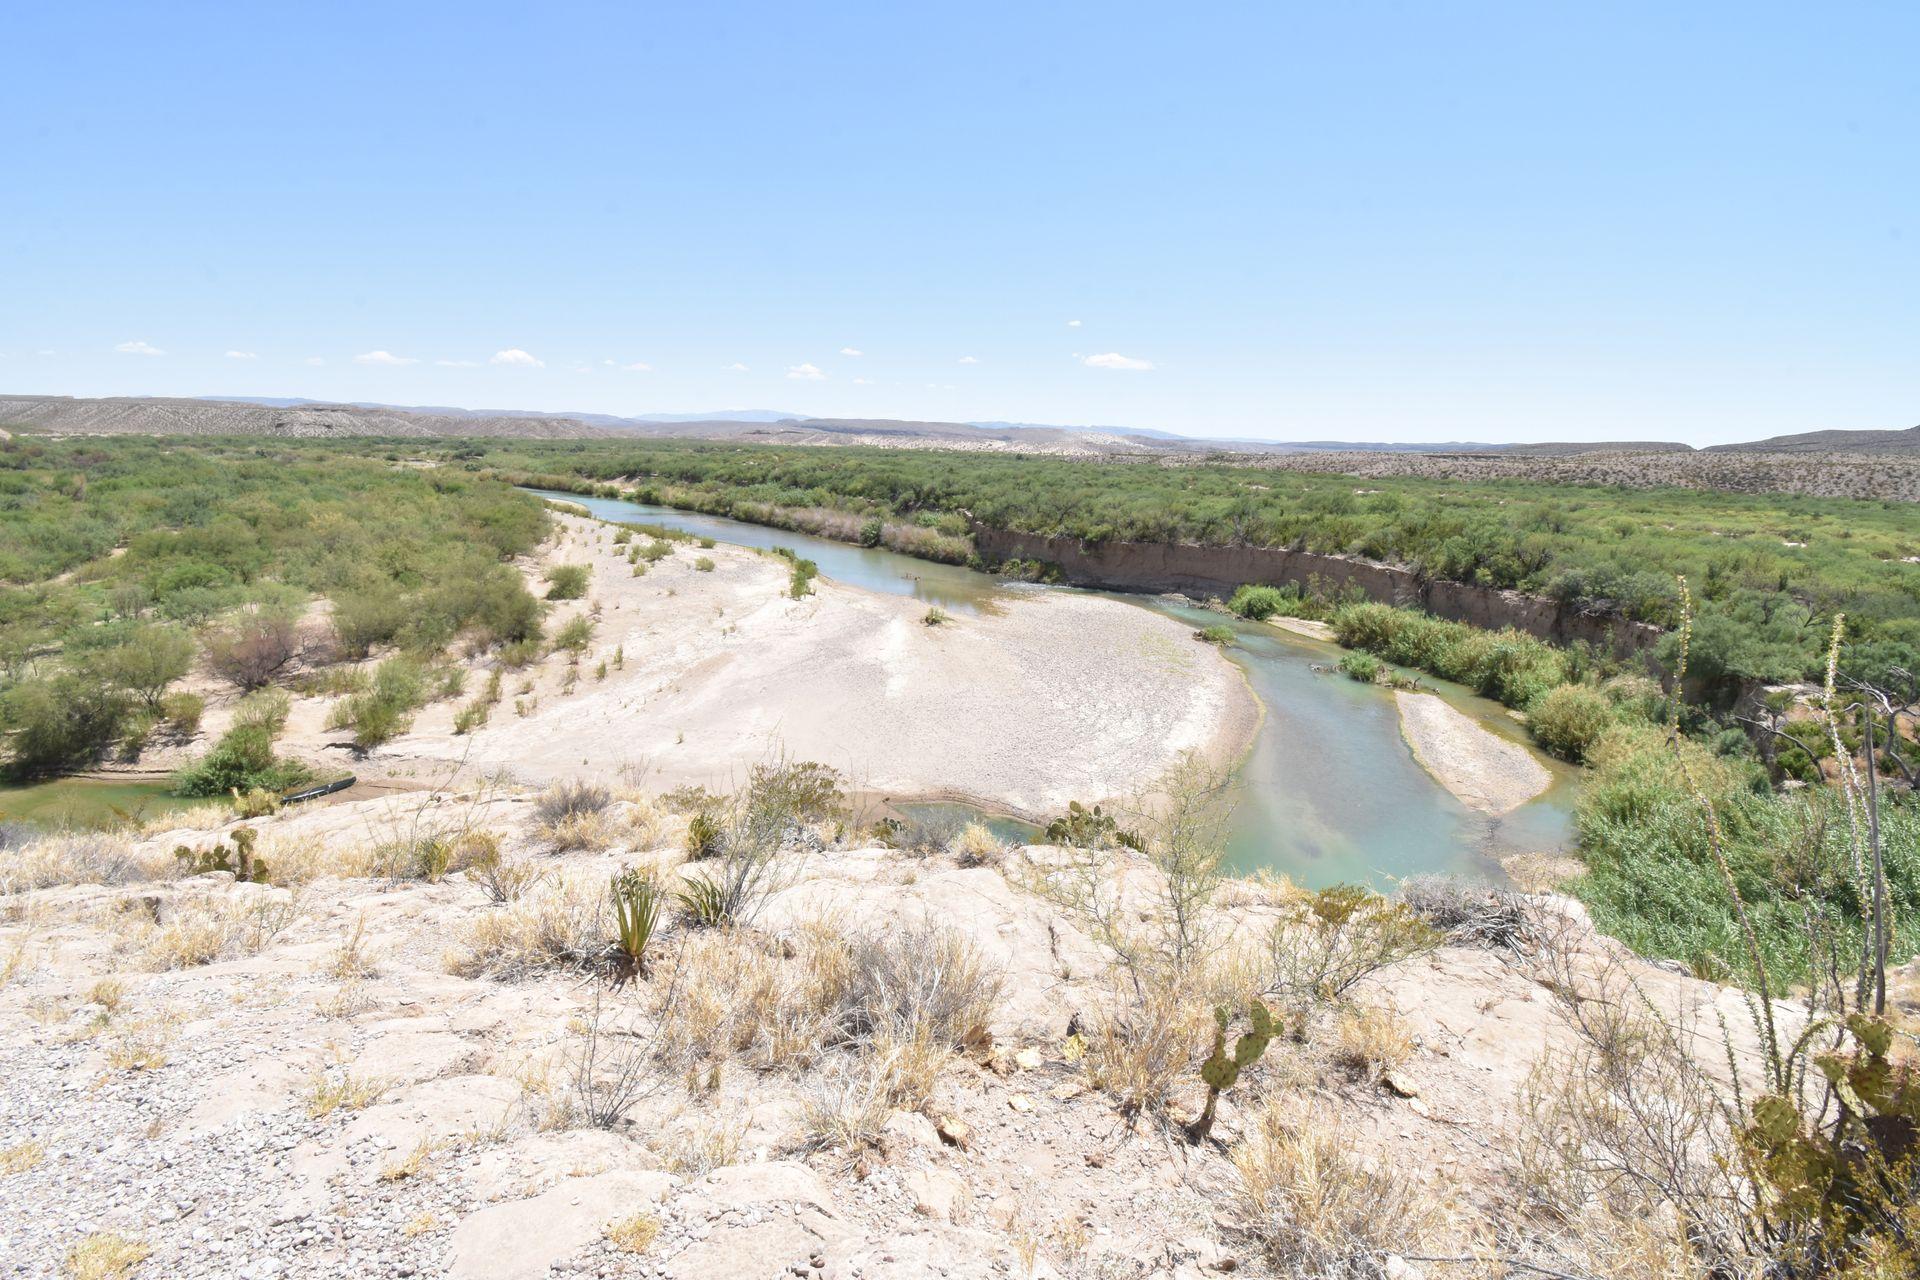 Looking down at the Rio Grande River on the Boquillas Canyon trail.